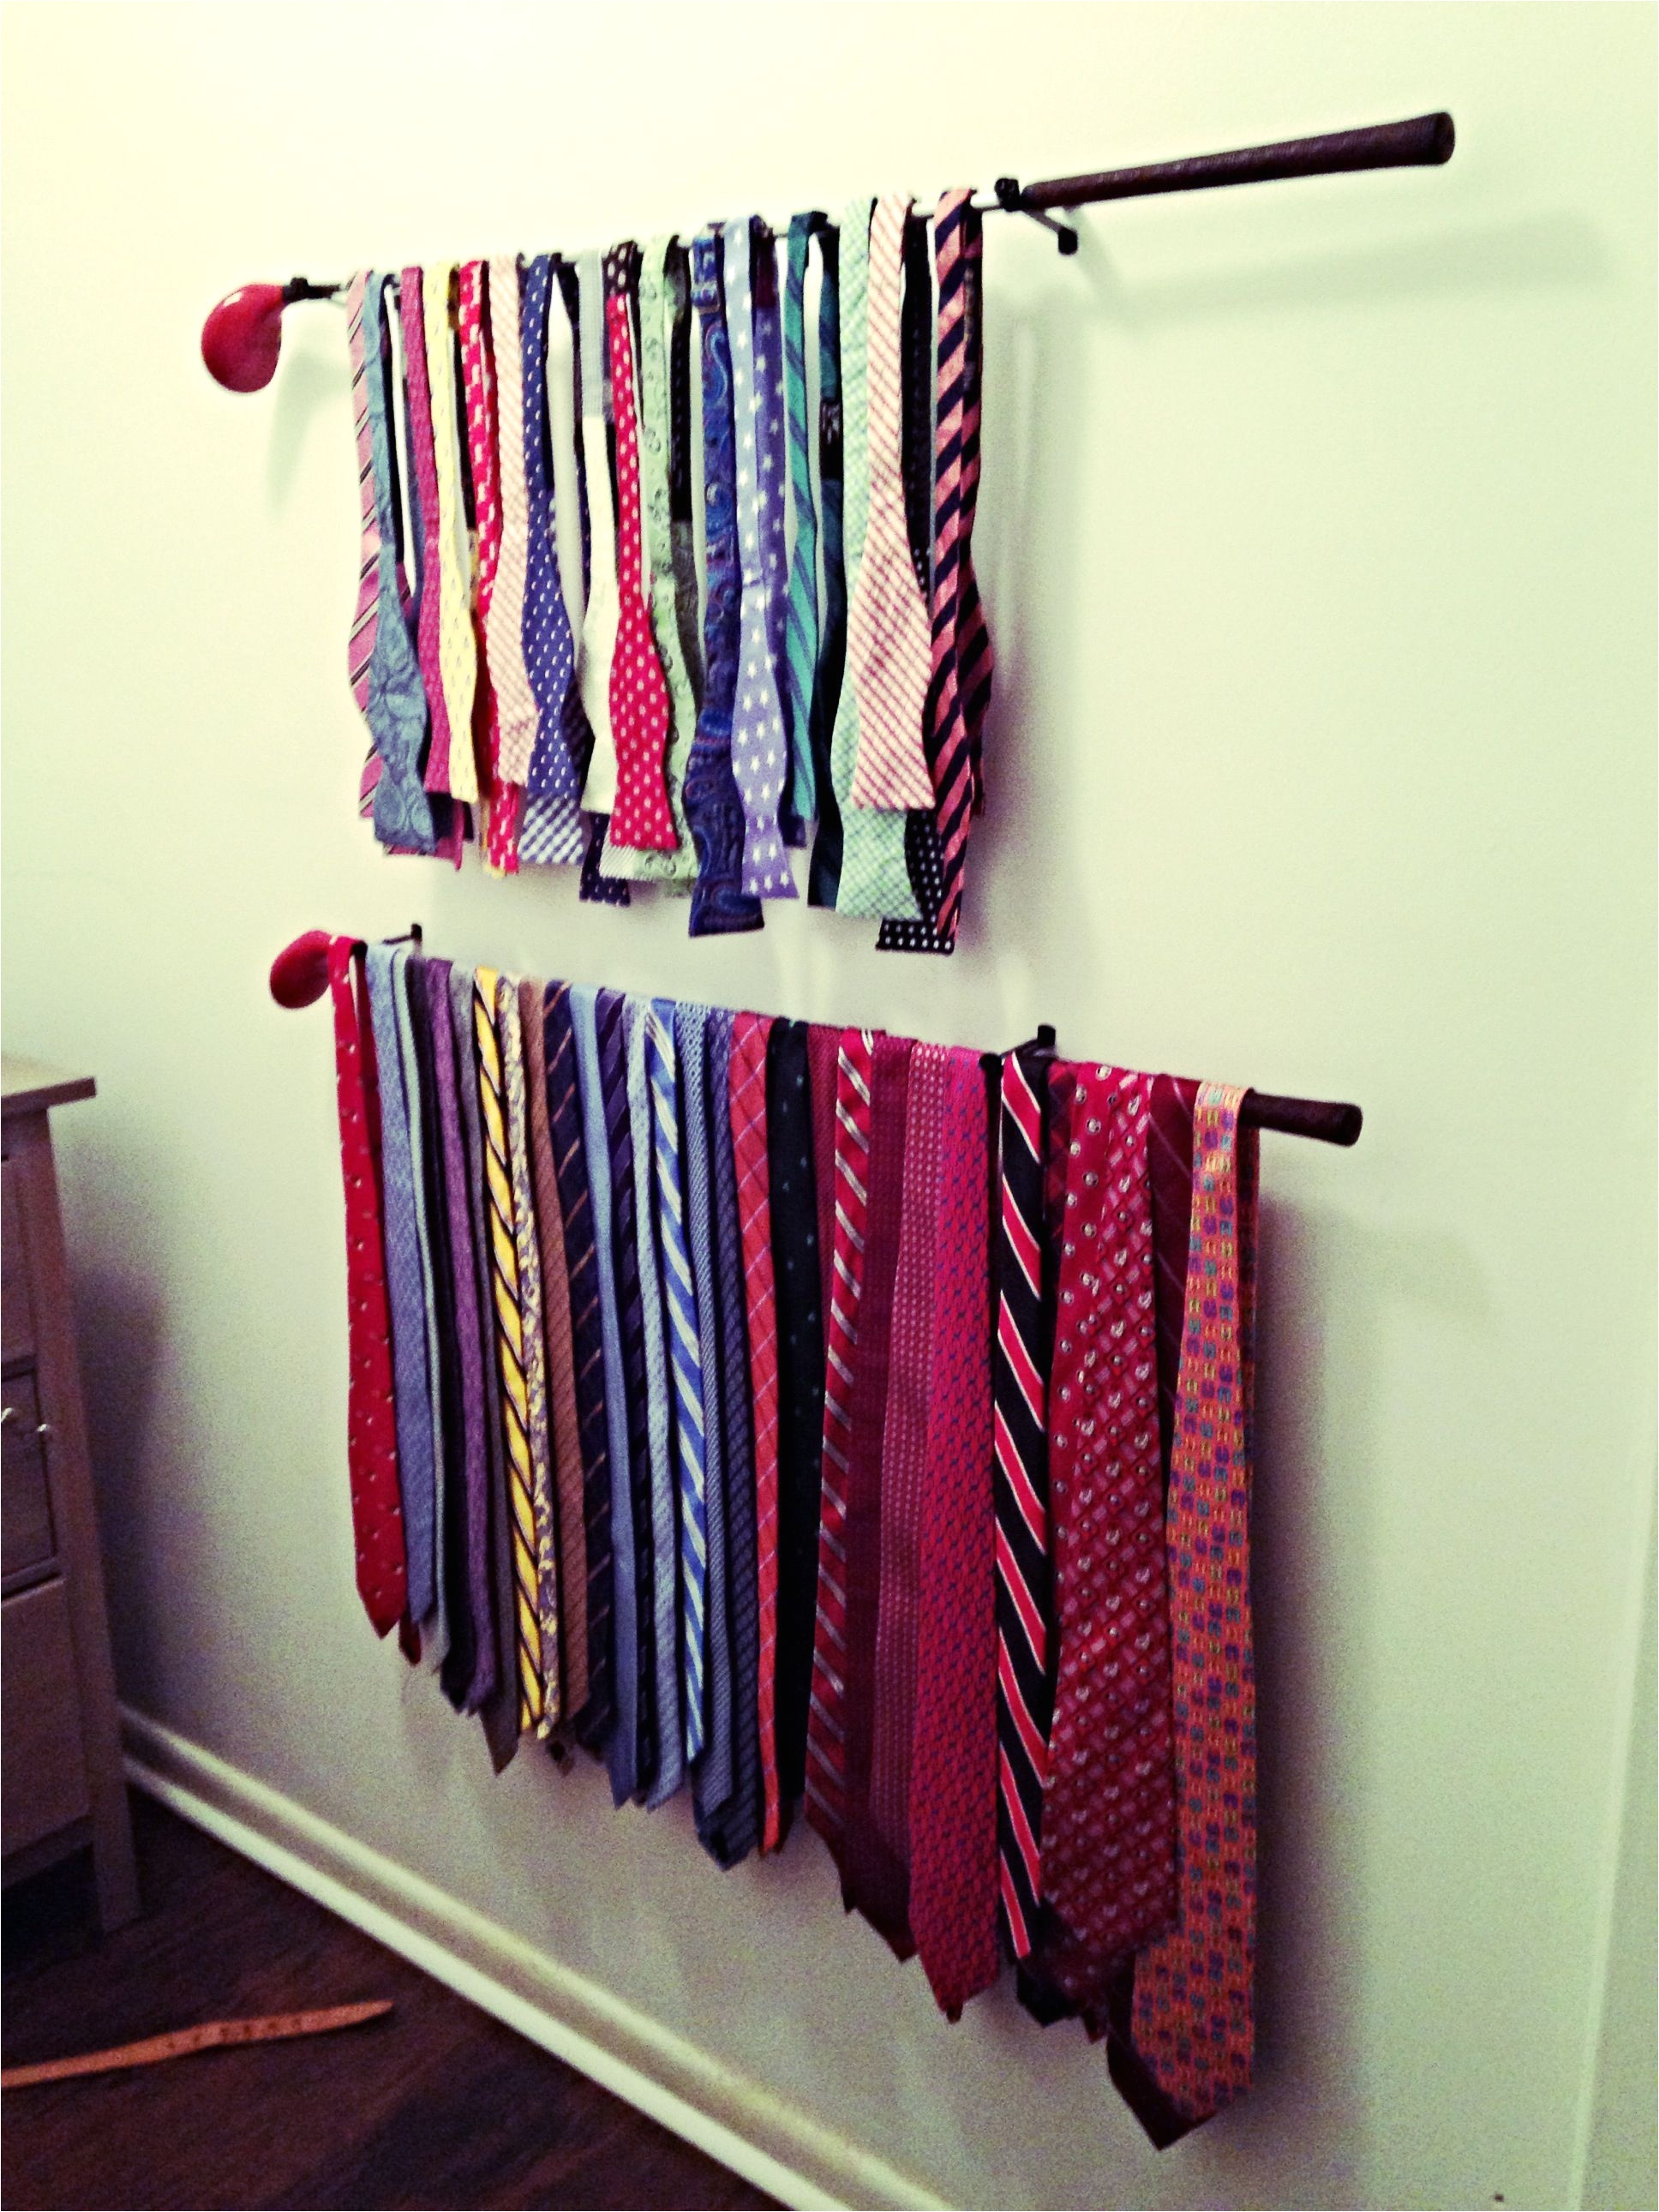 jared turned my grandfathers old wooden golf clubs into his new tie rack turned out awesome